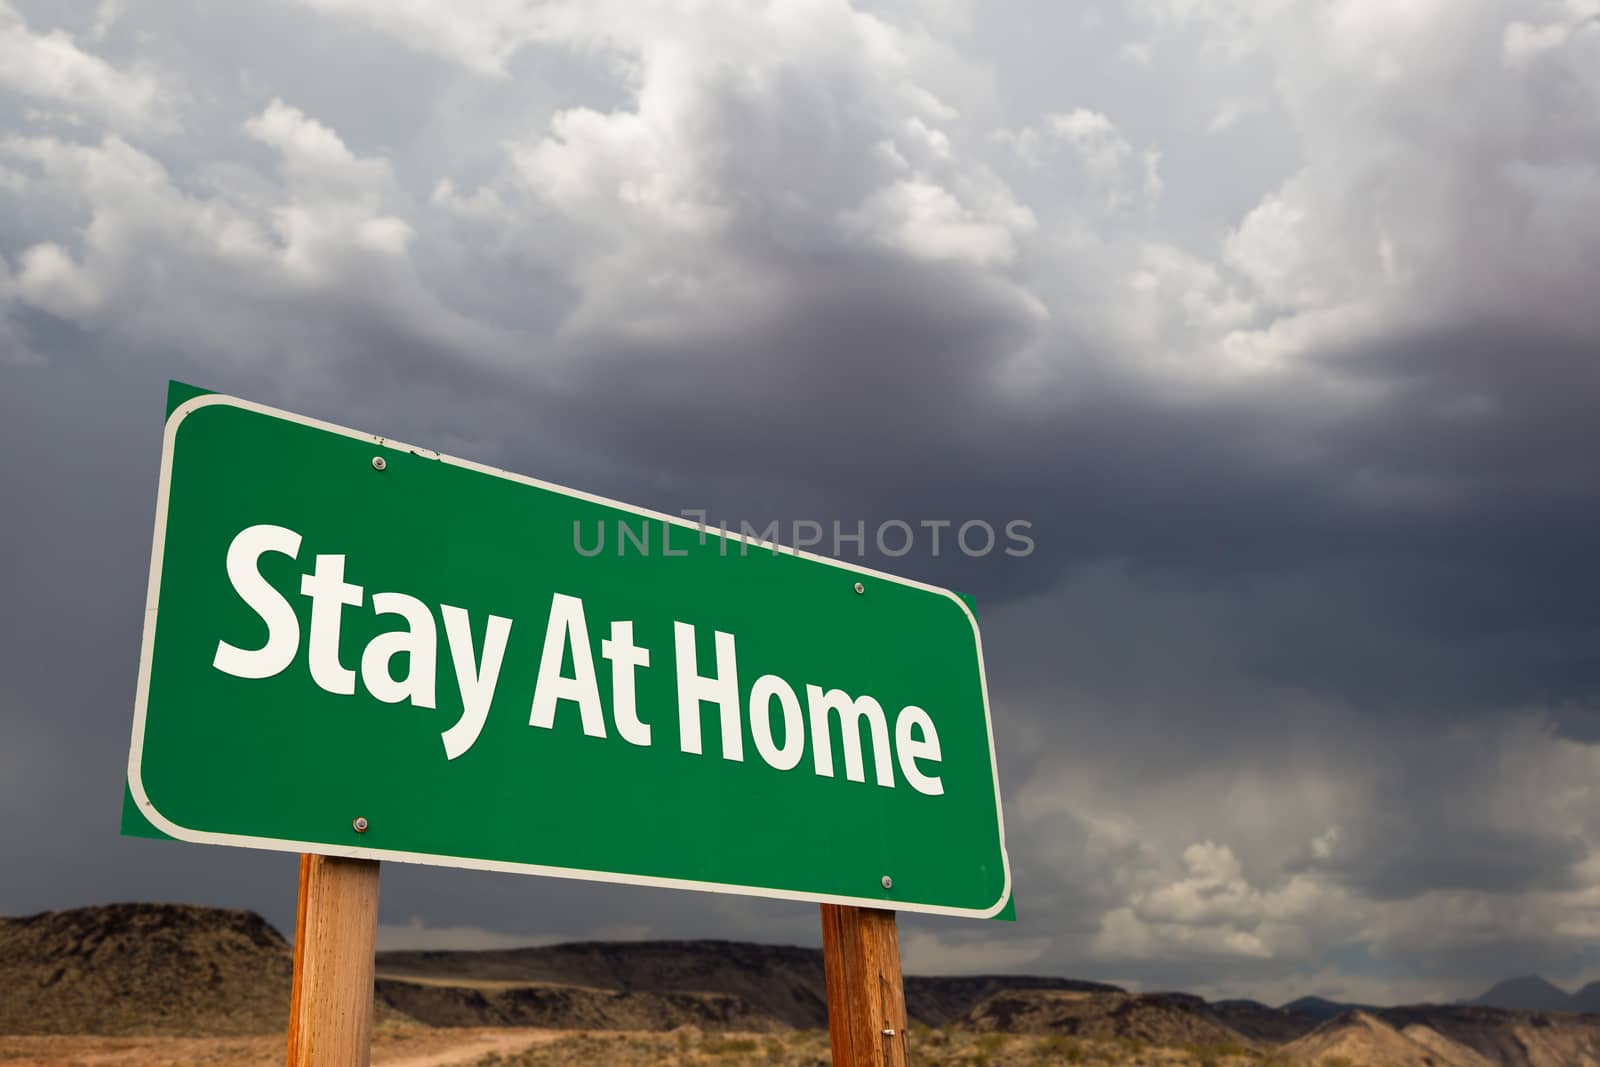 Stay At Home Green Road Sign Against An Ominous Cloudy Sky by Feverpitched